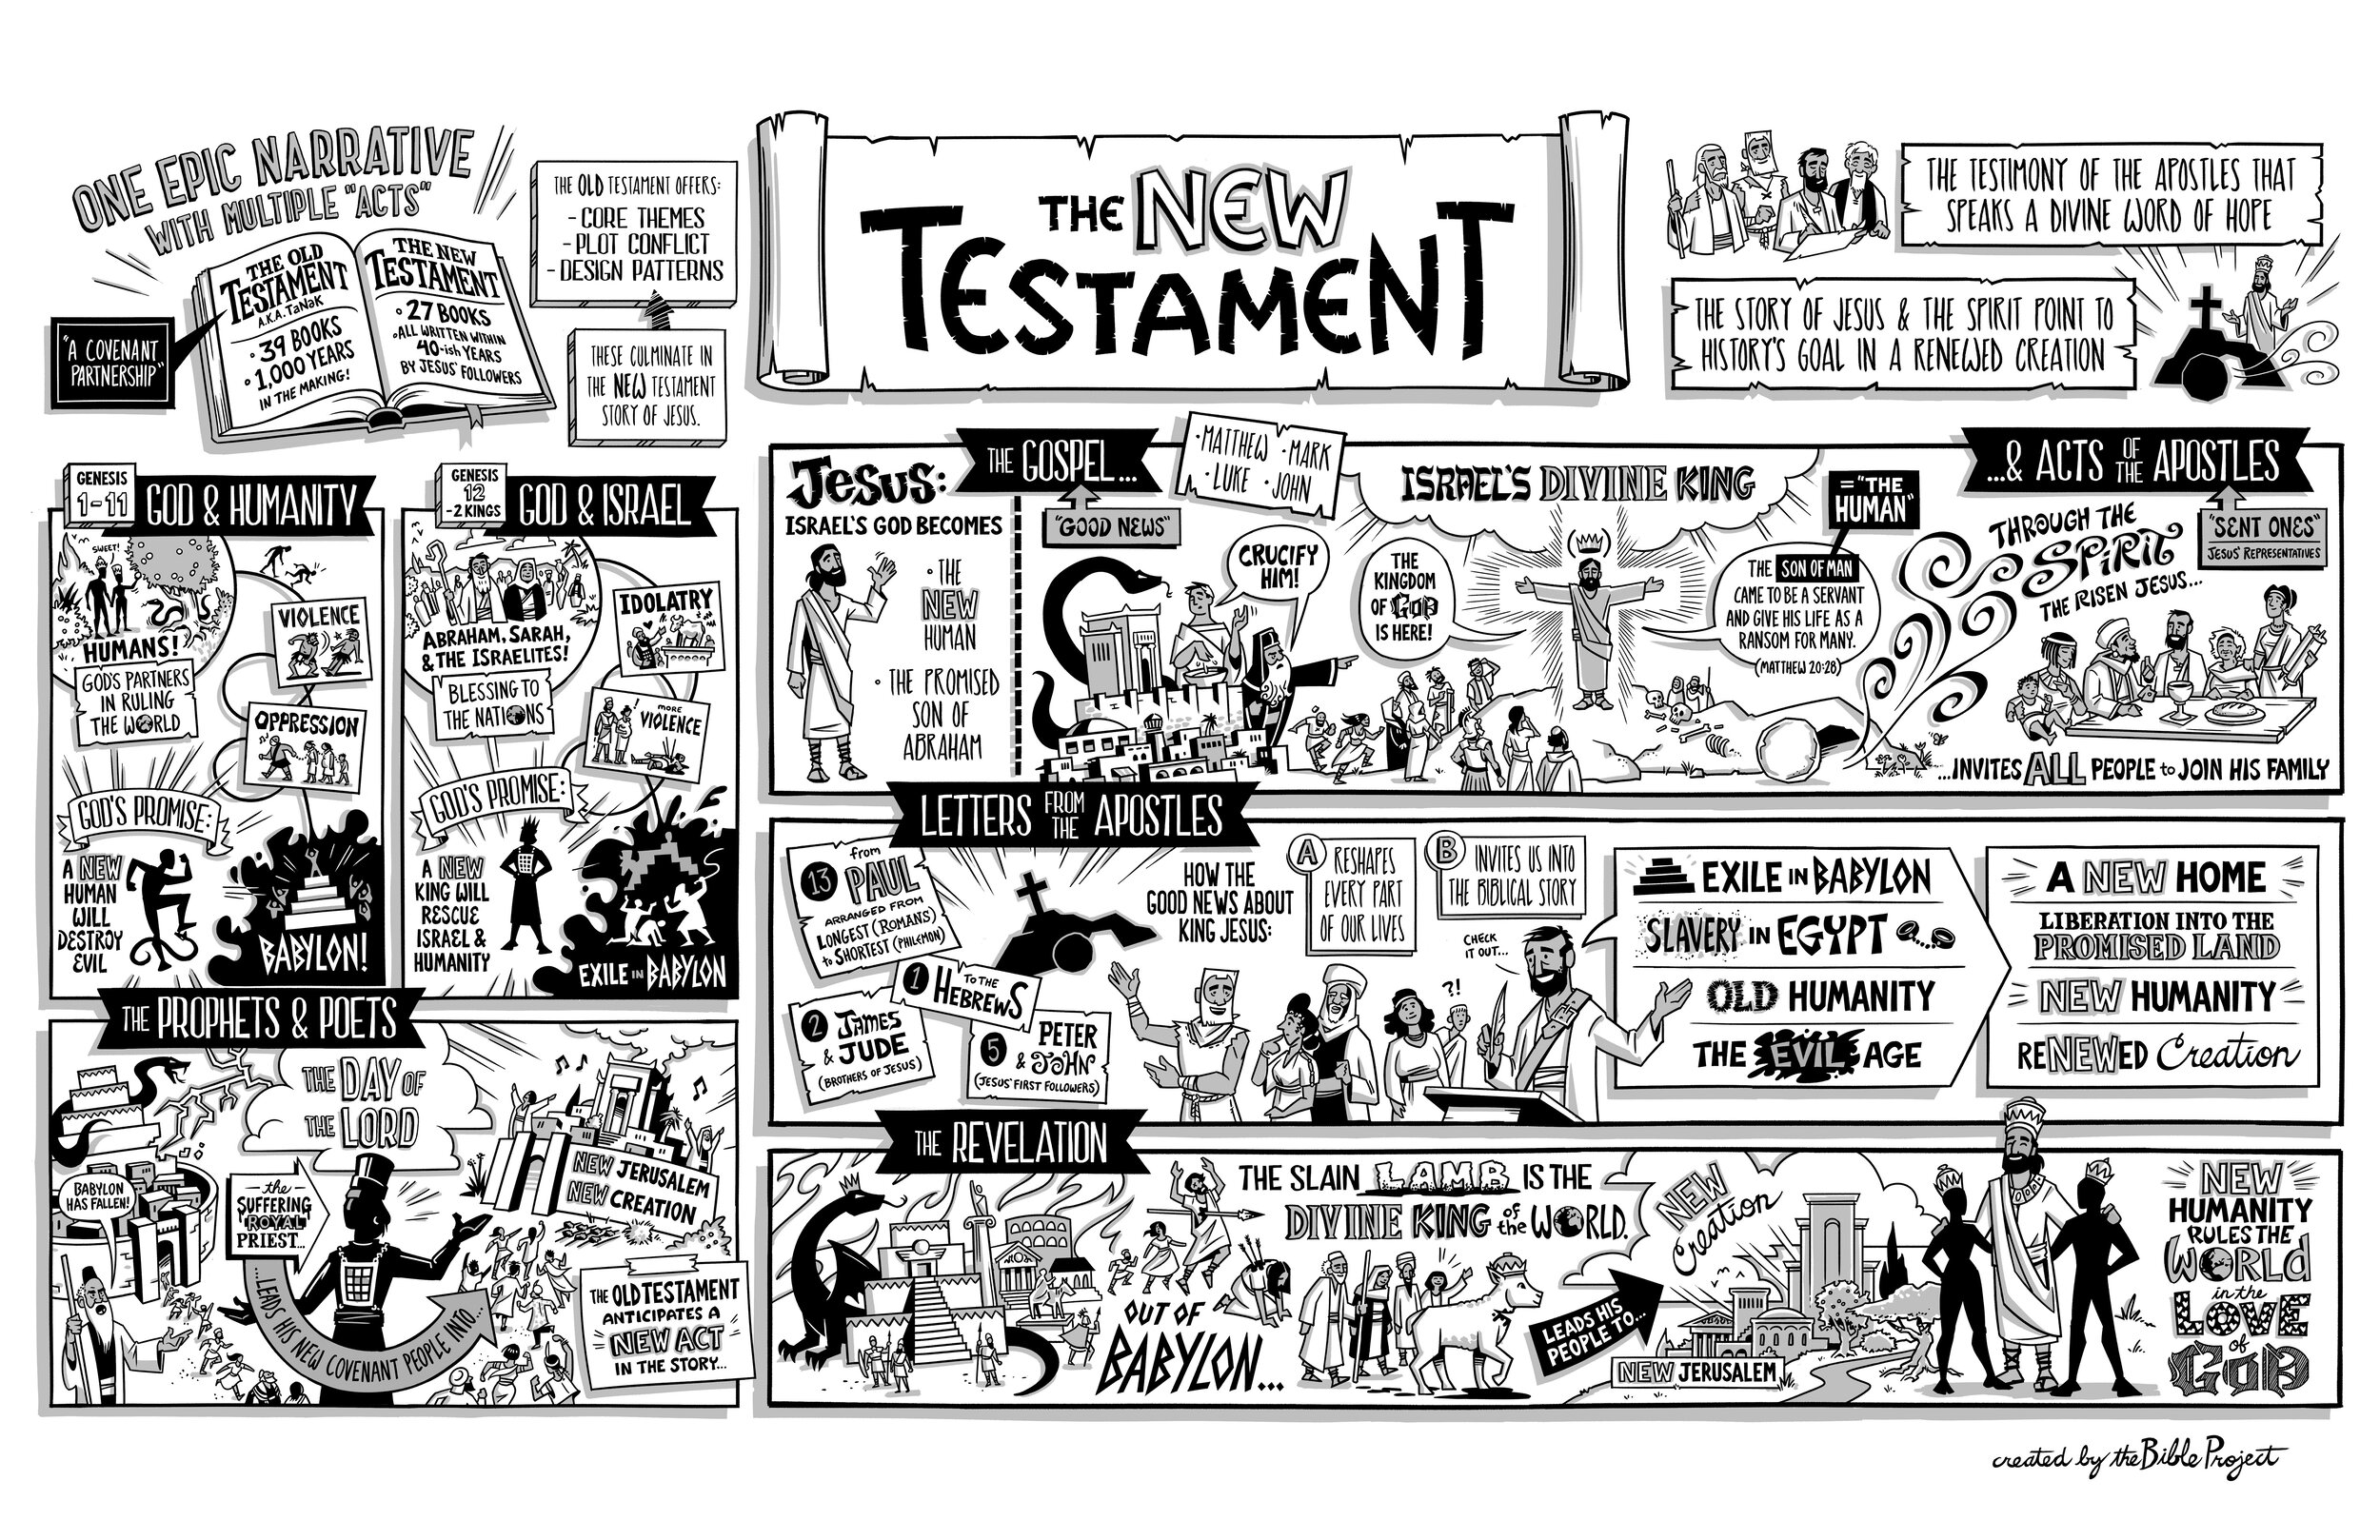 BibleProject: New Testament Overview (Video)